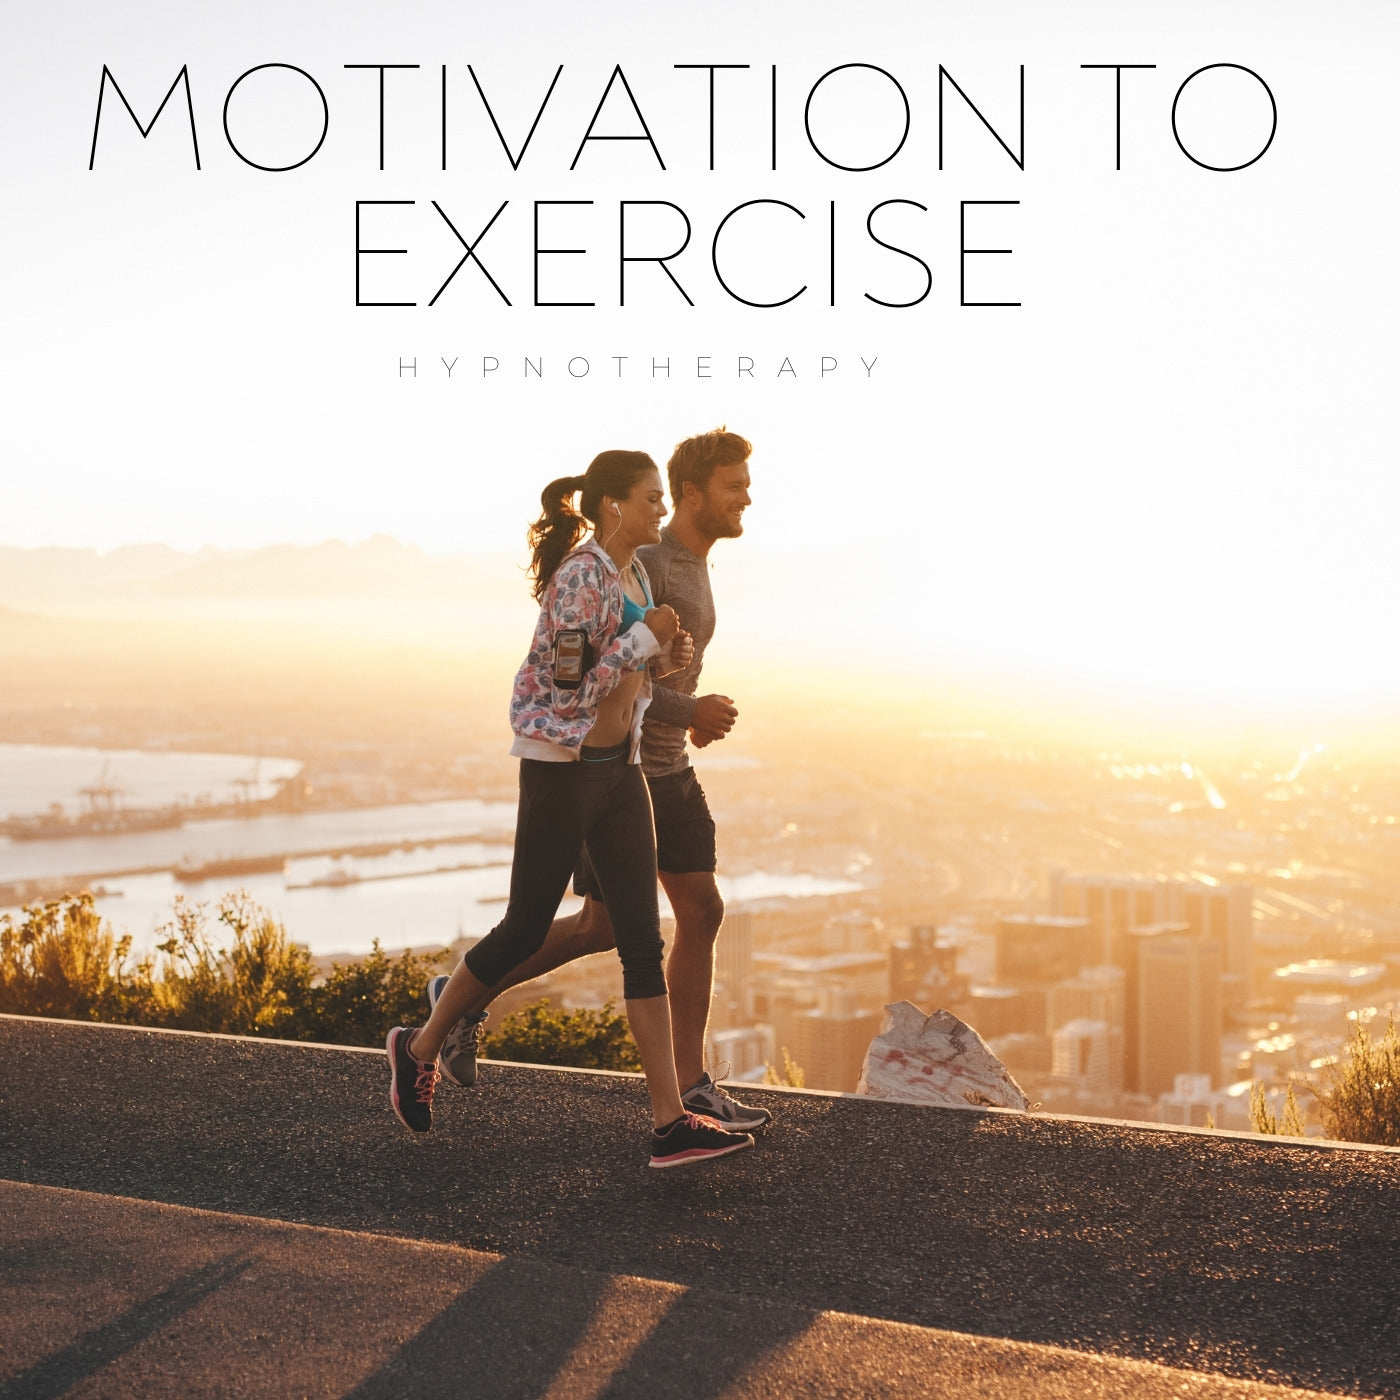 Image of Motivation to Exercise Hypnotherapy MO TIVATION TO cXERCISE HYPNOTHERAPY 